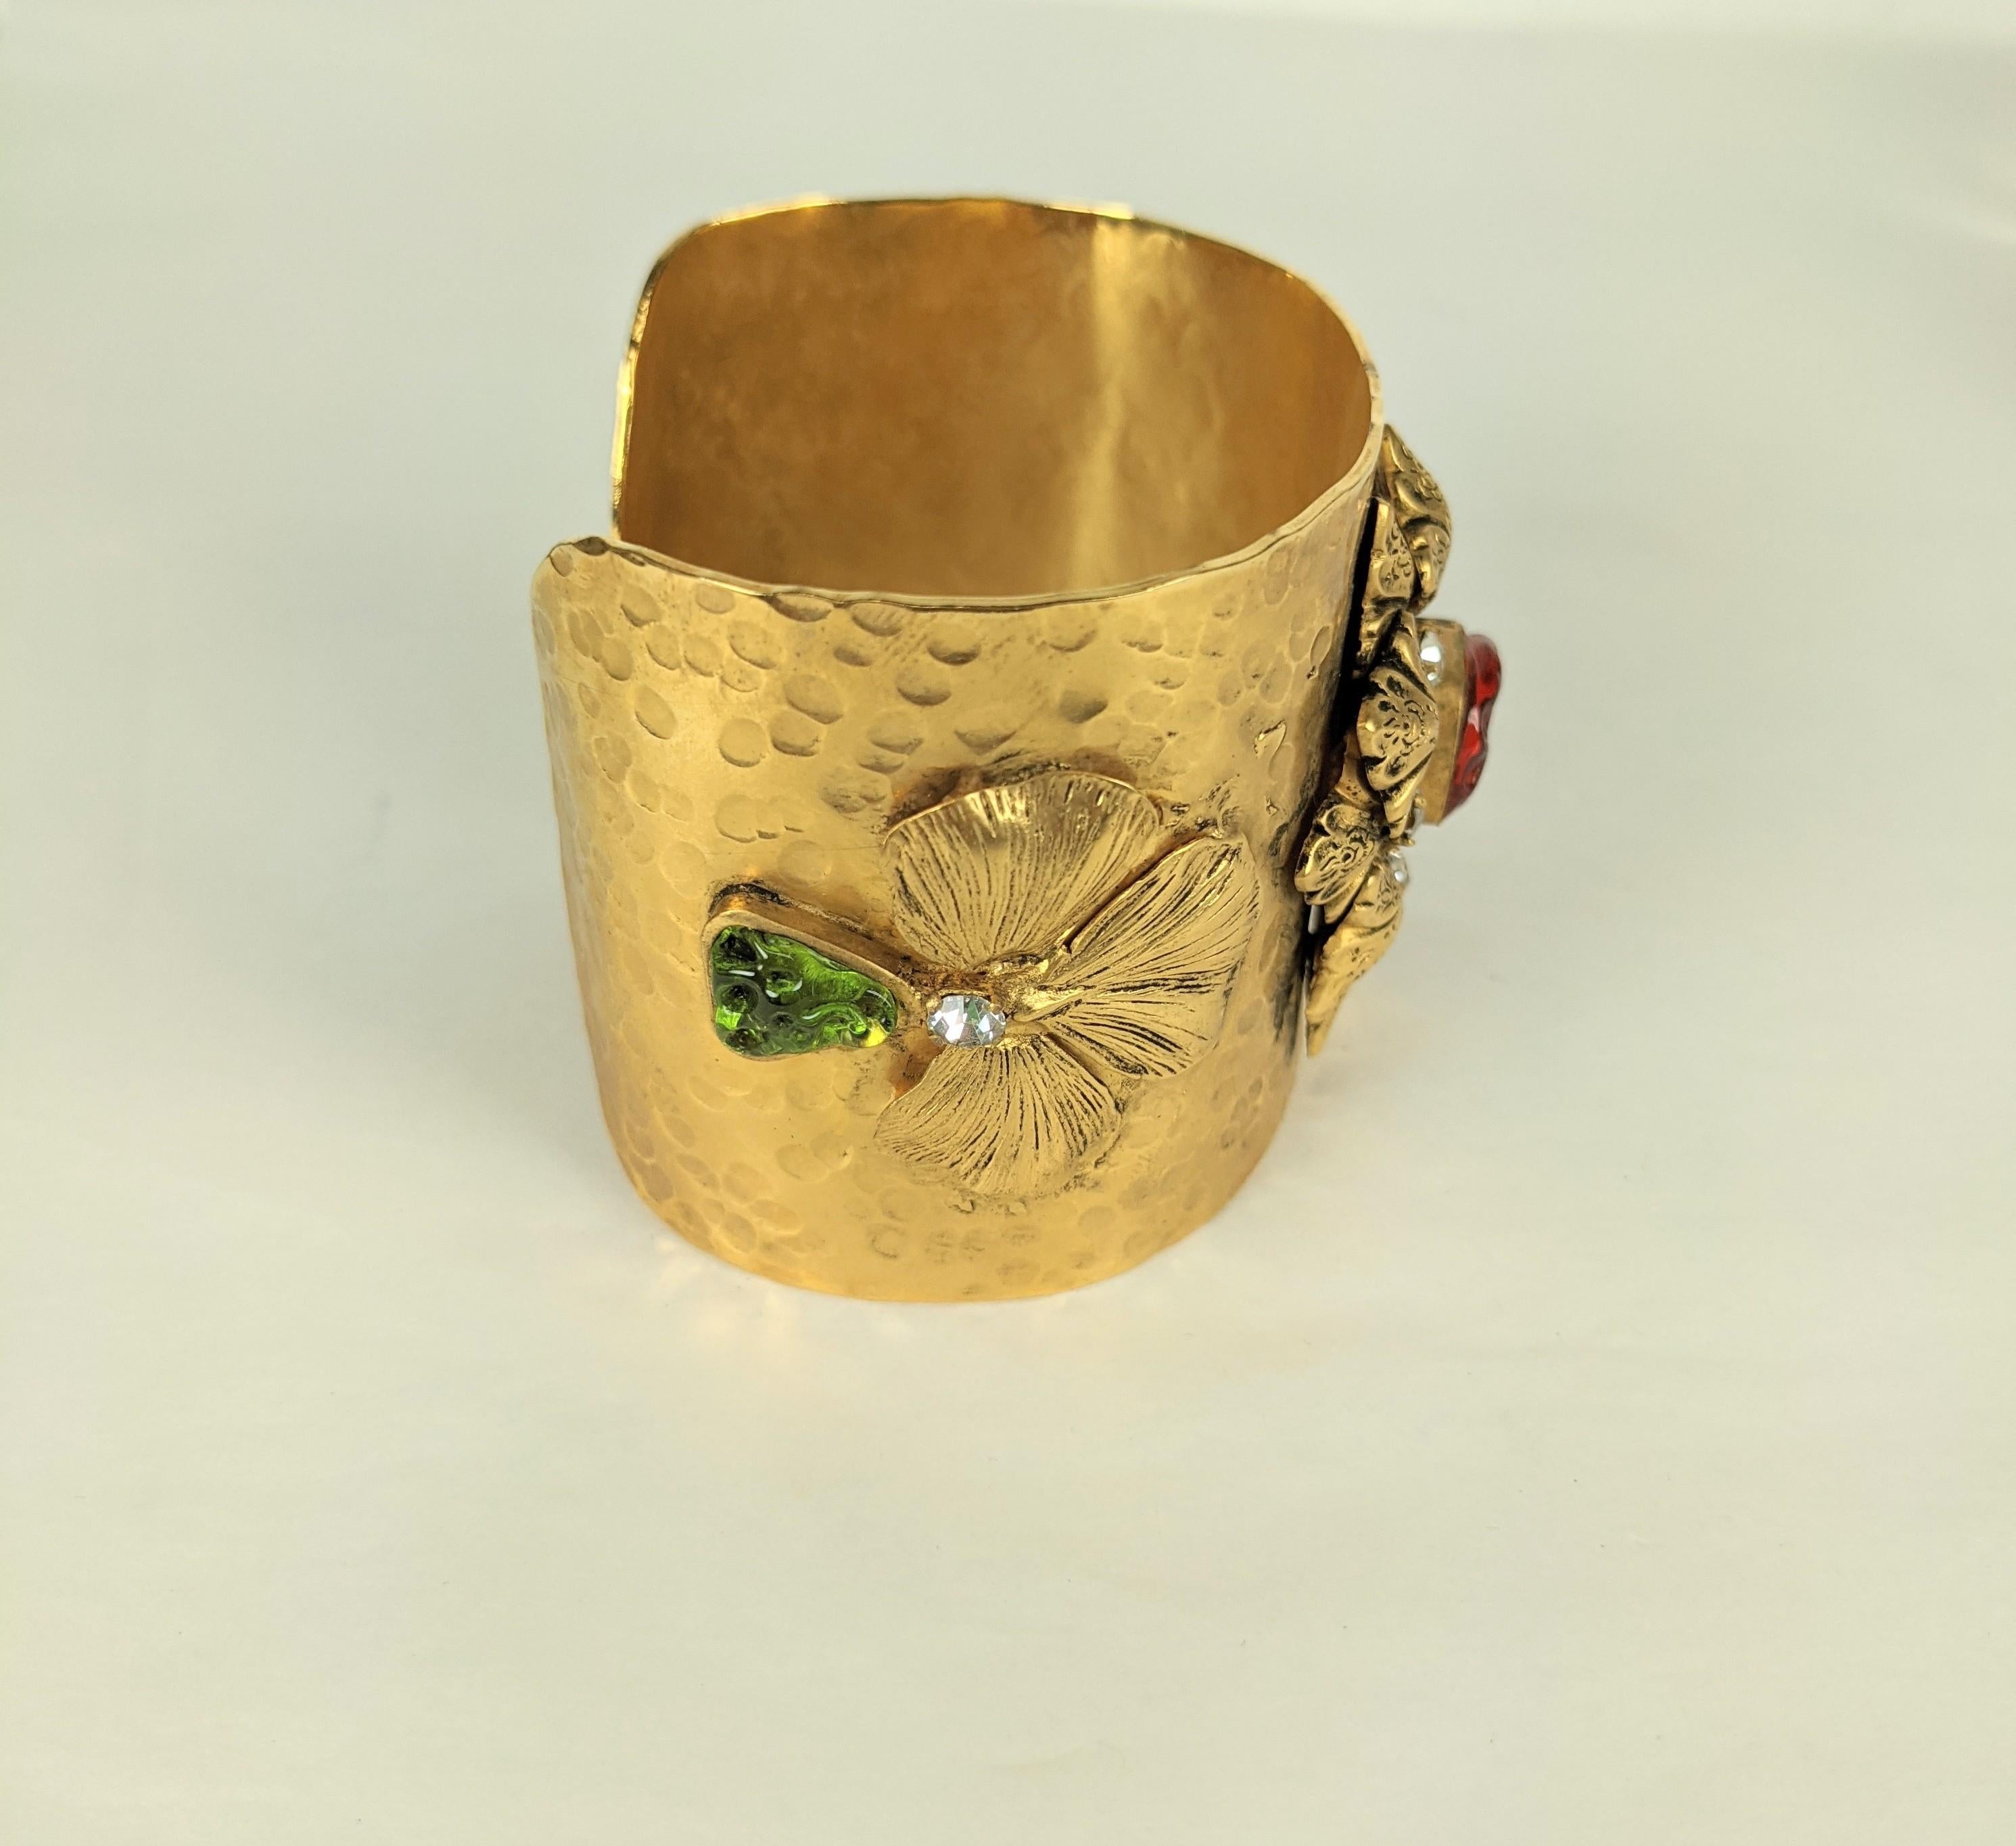  Chanel Maison Gripoix Floral Cuff Bracelet In Excellent Condition For Sale In New York, NY